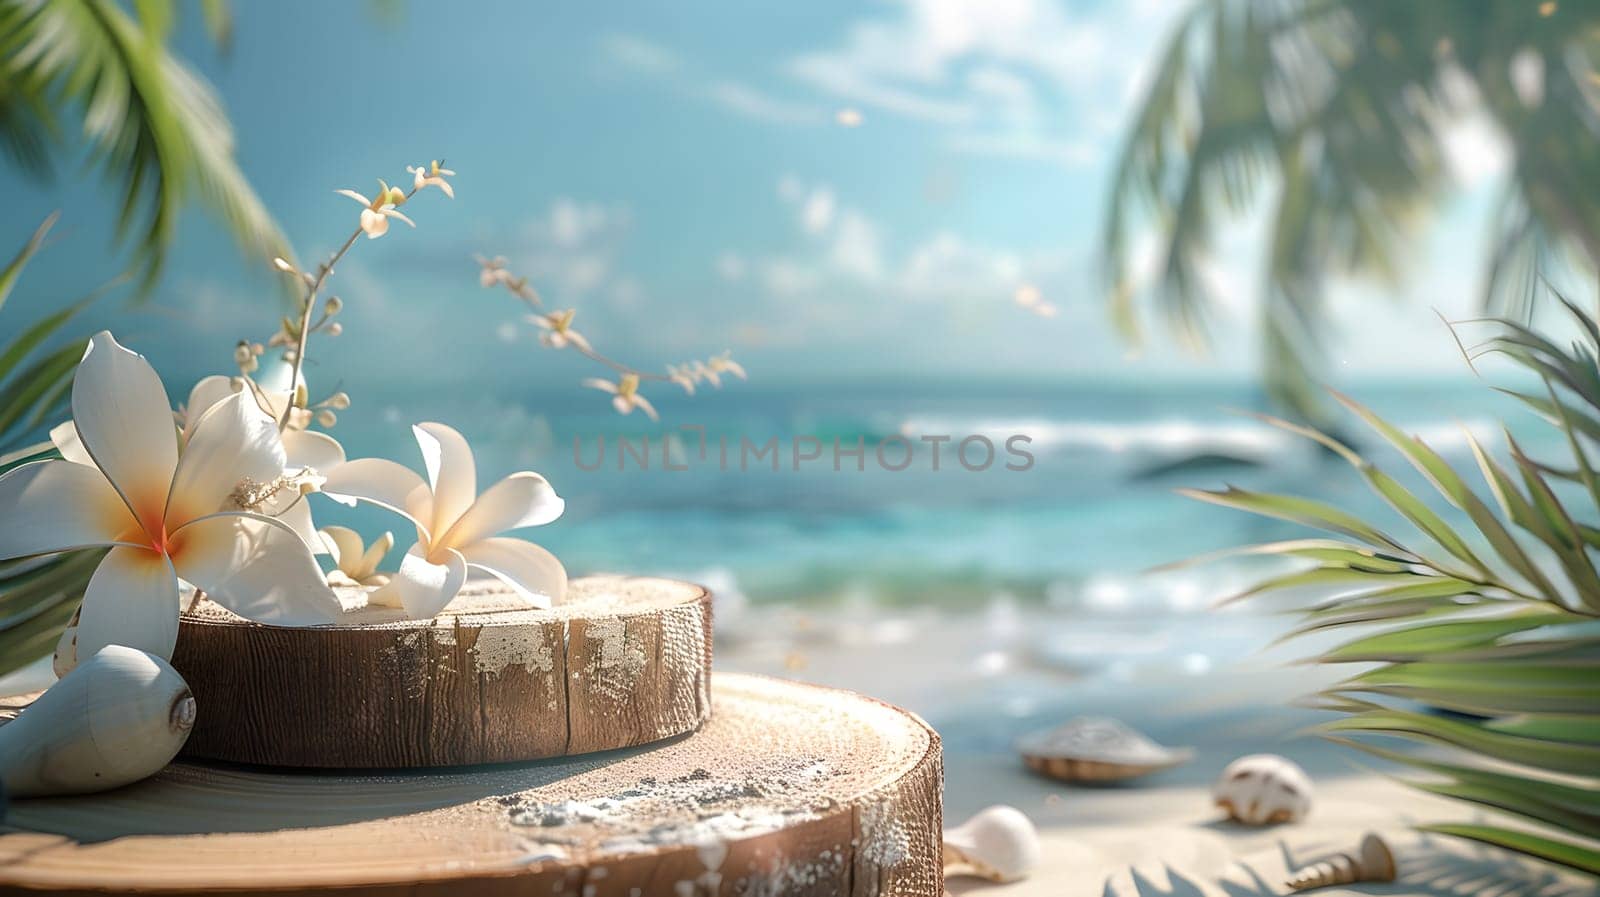 A charming wooden stump adorned with vibrant flowers and seashells, nestled on a sandy beach overlooking the vast ocean. The perfect blend of natures beauty and tranquility